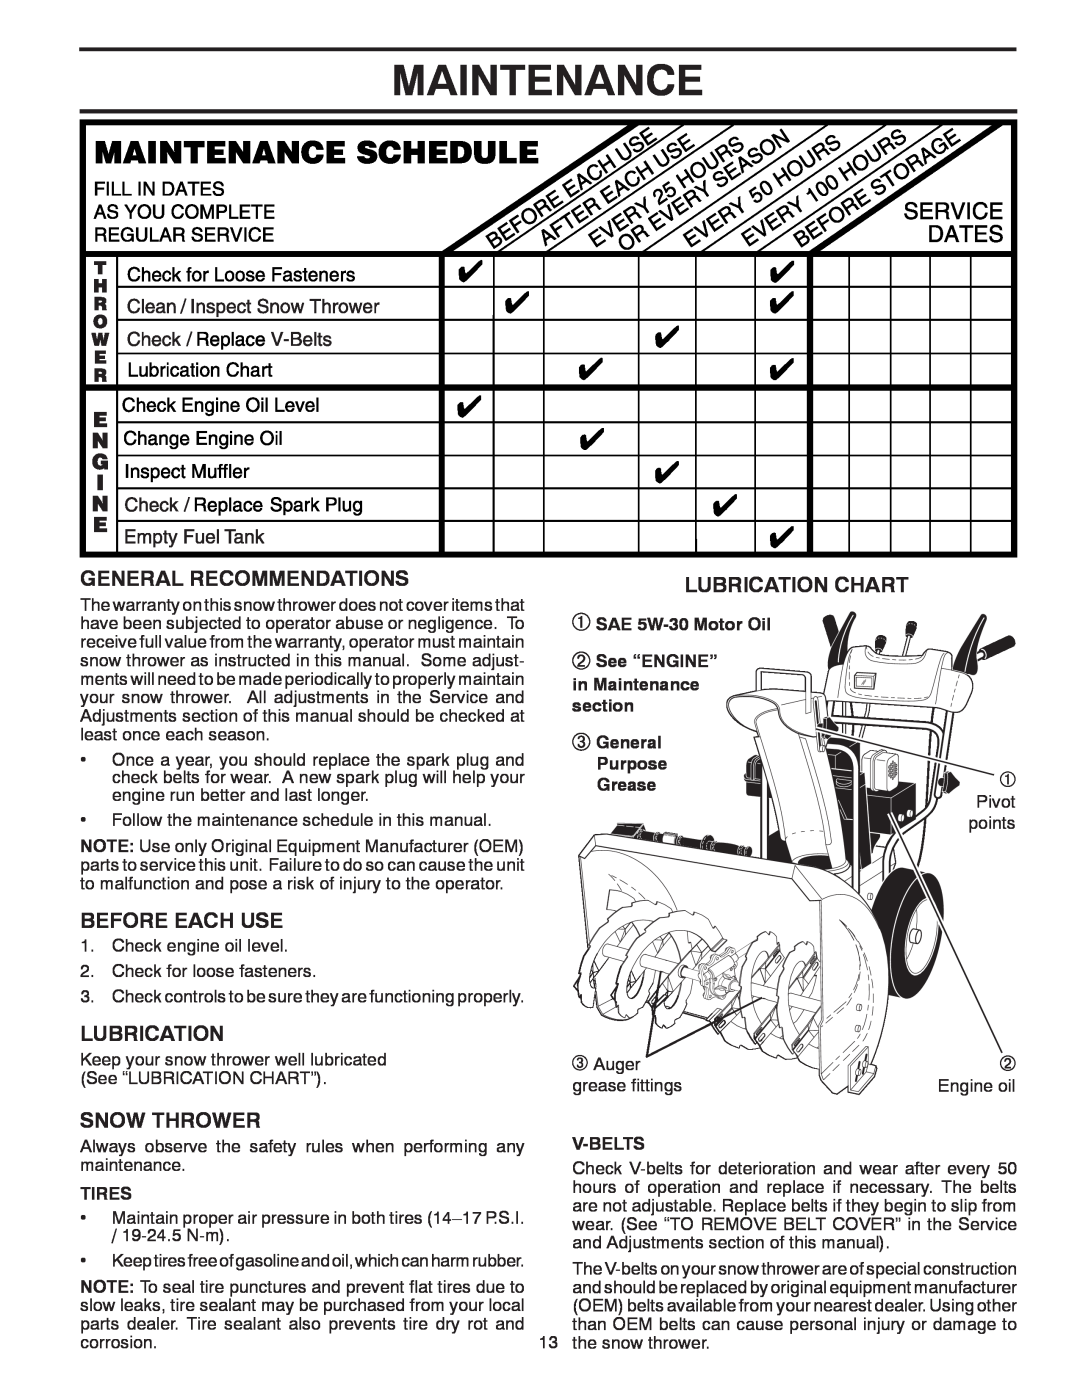 Poulan 96194000504 Maintenance, General Recommendations, Before Each Use, Lubrication Chart, Snow Thrower, Tires 